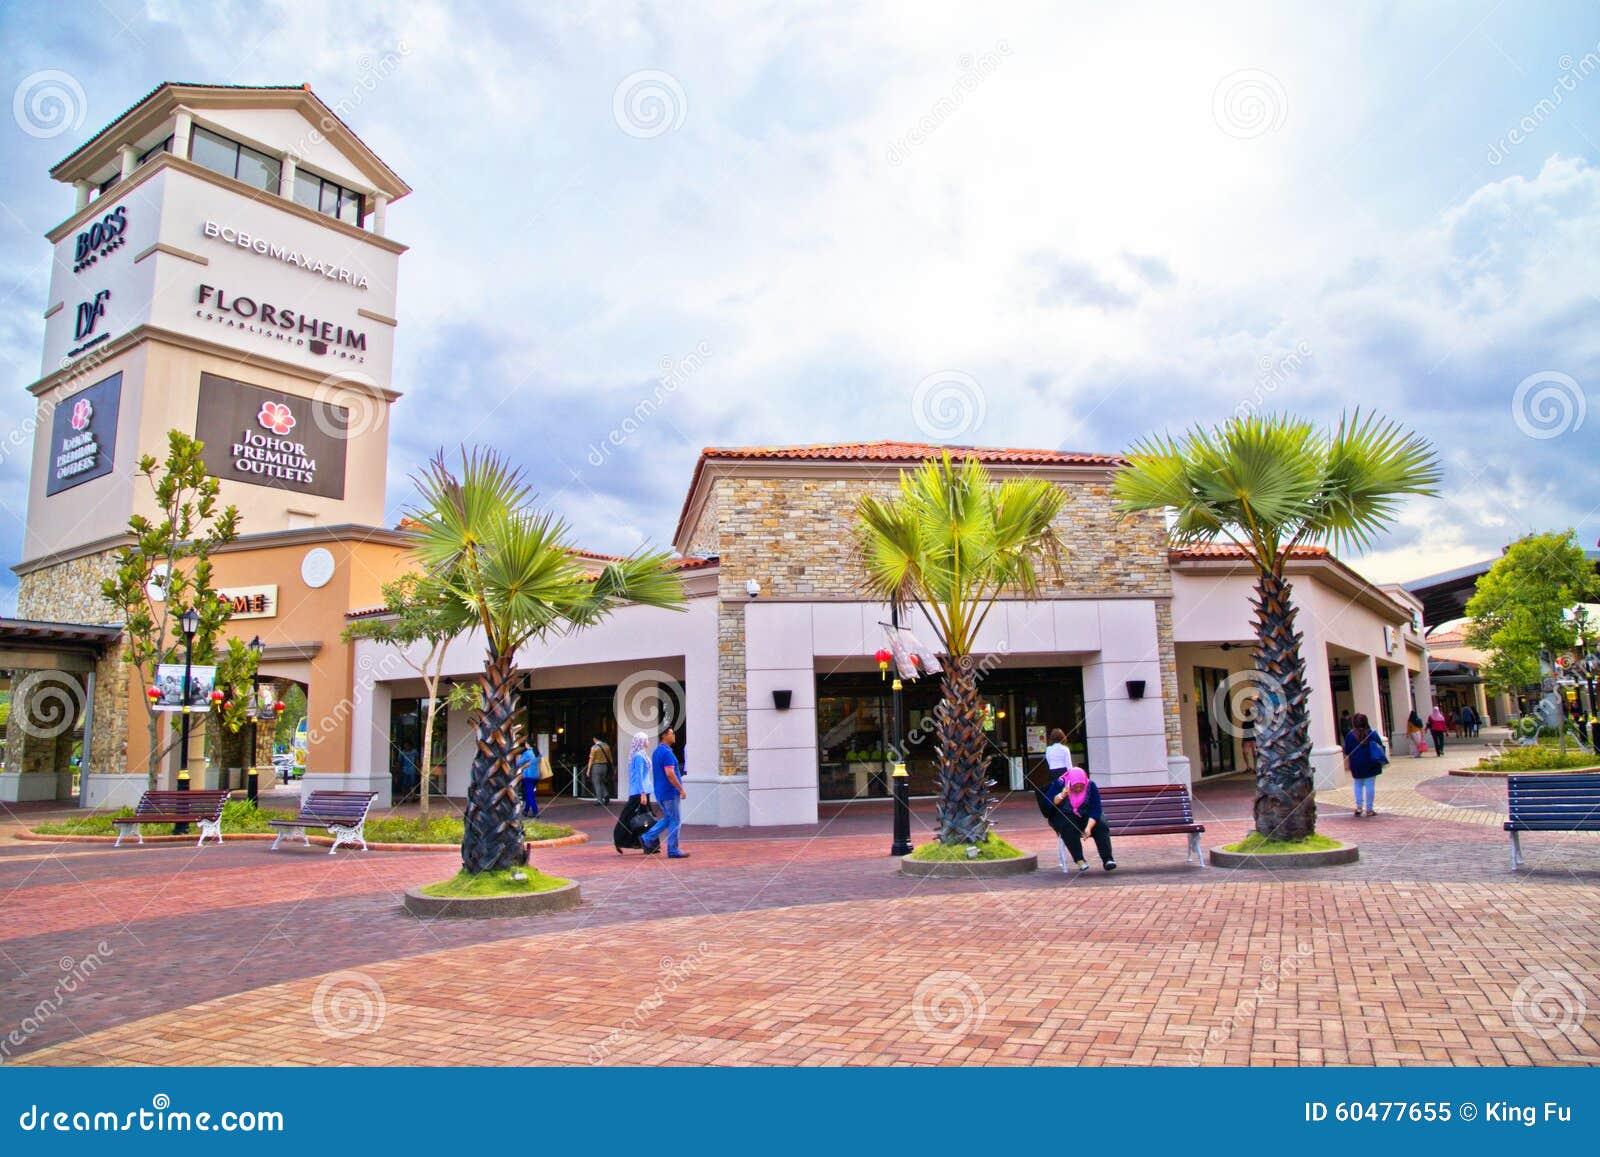 View Of Johor Premium Outlets An Outlet Mall In Johor Bahru Malaysia Stock  Photo - Download Image Now - iStock